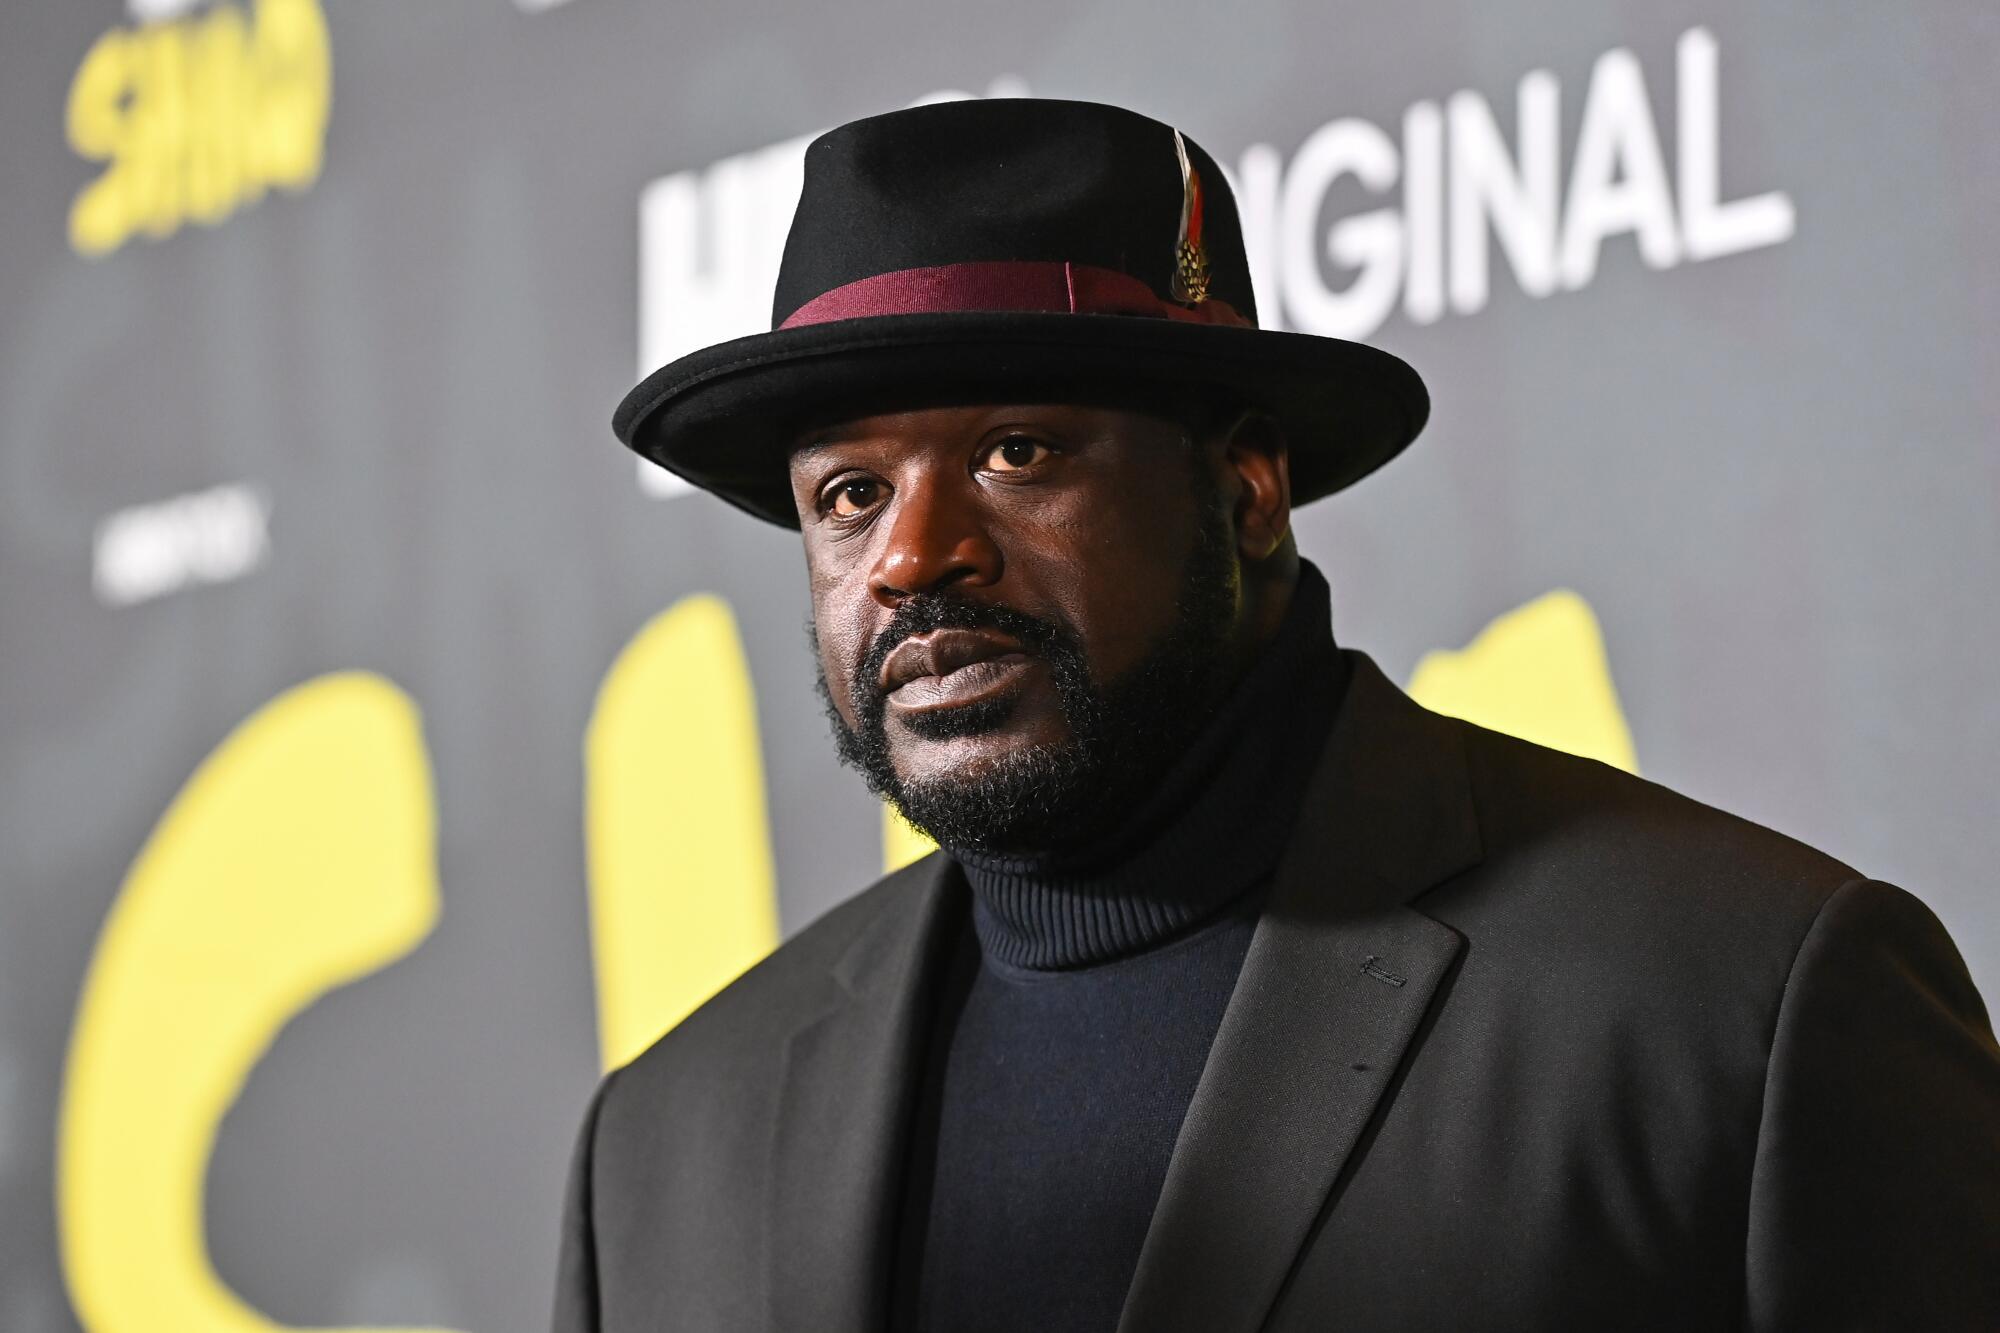 shaquille-oneal-invests-in-campus-an-online-college-start-up-to-tackle-student-loan-debt-crisis